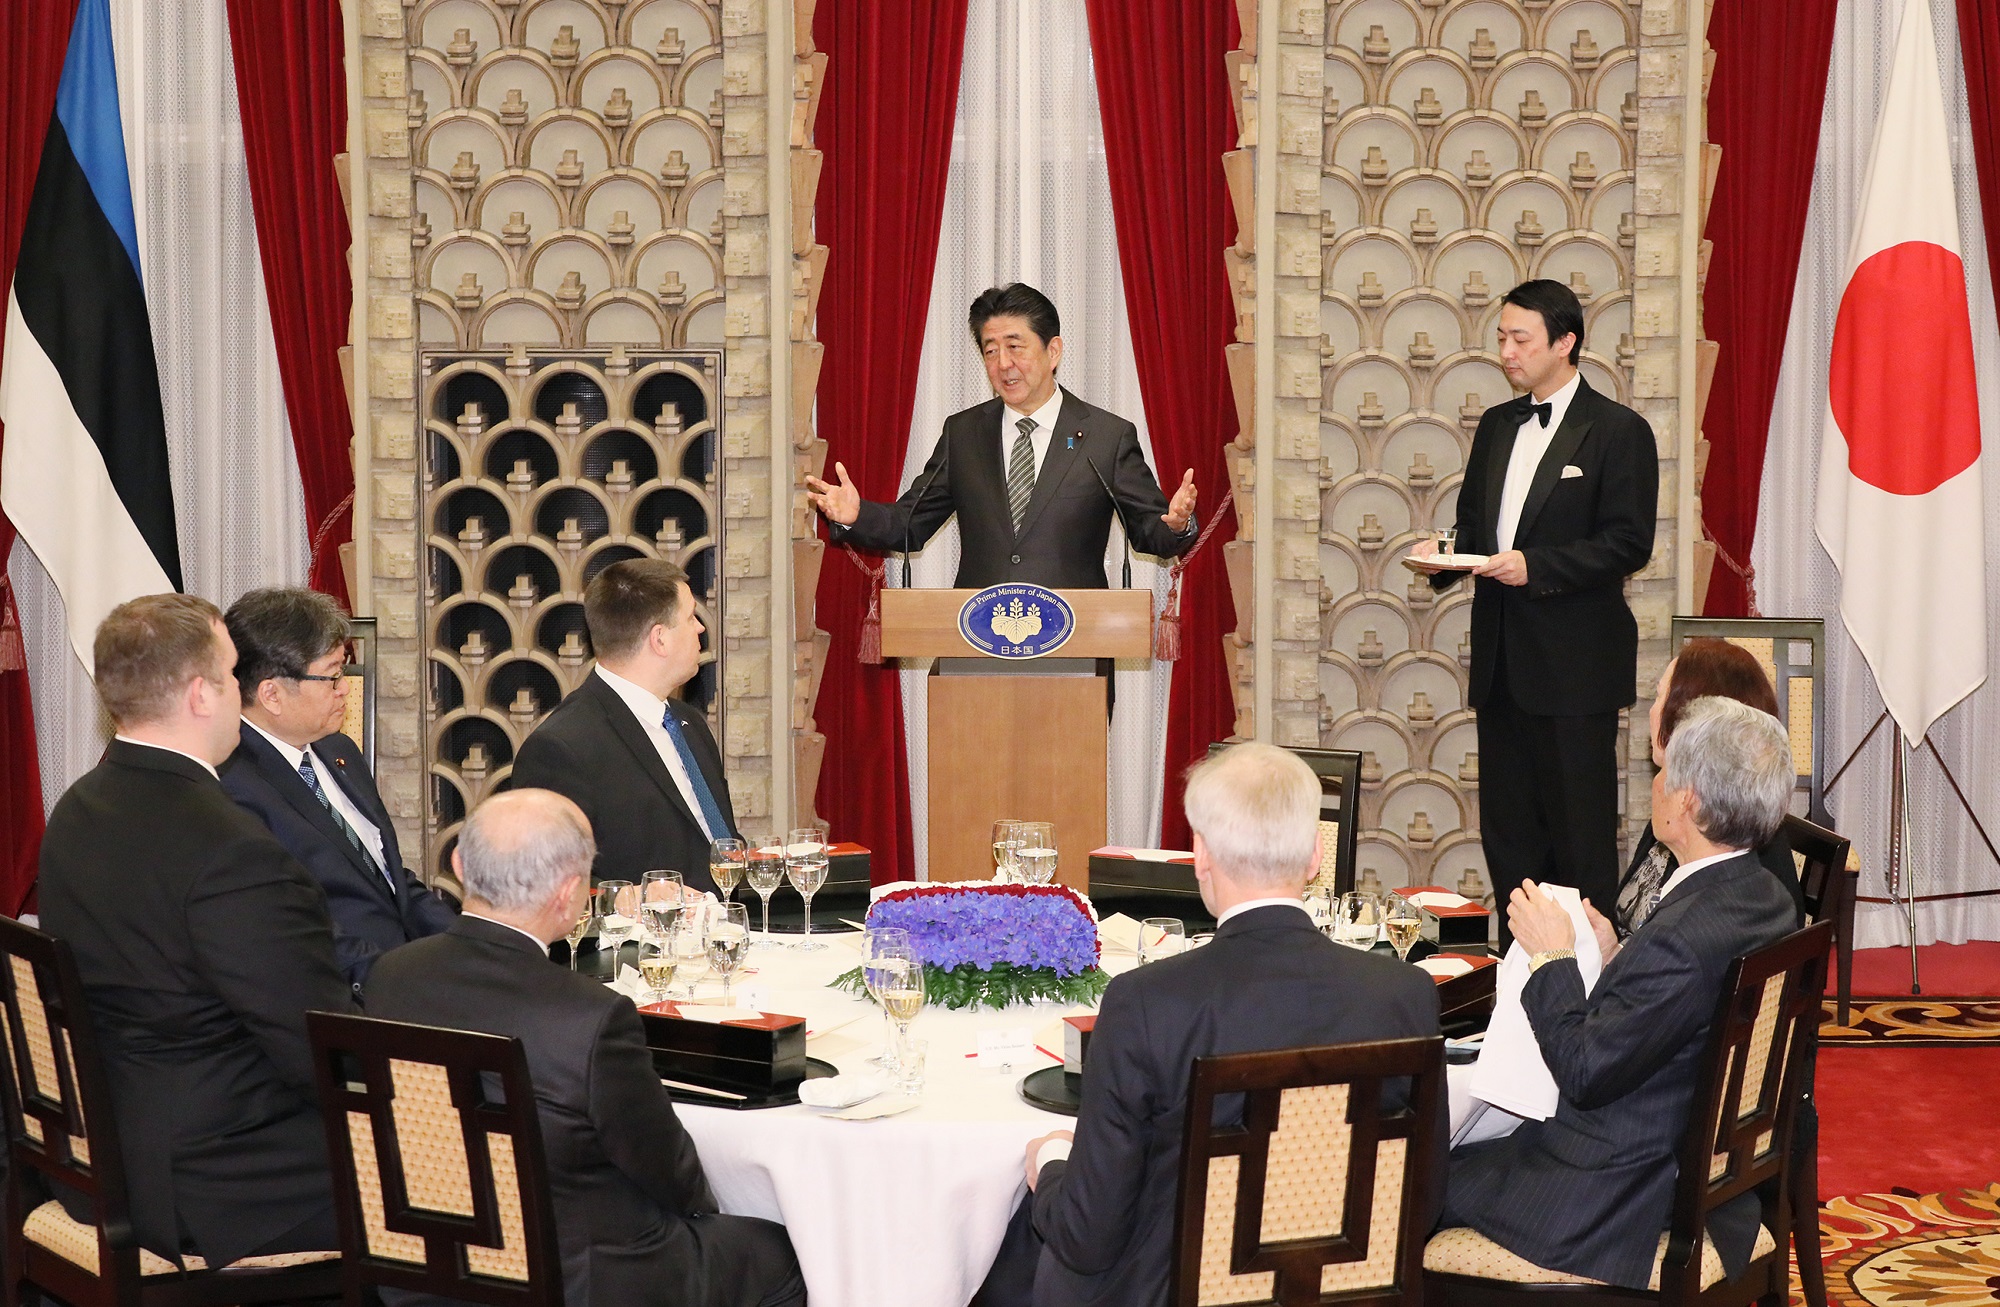 Photograph of the Prime Minister delivering an address at the banquet (4)